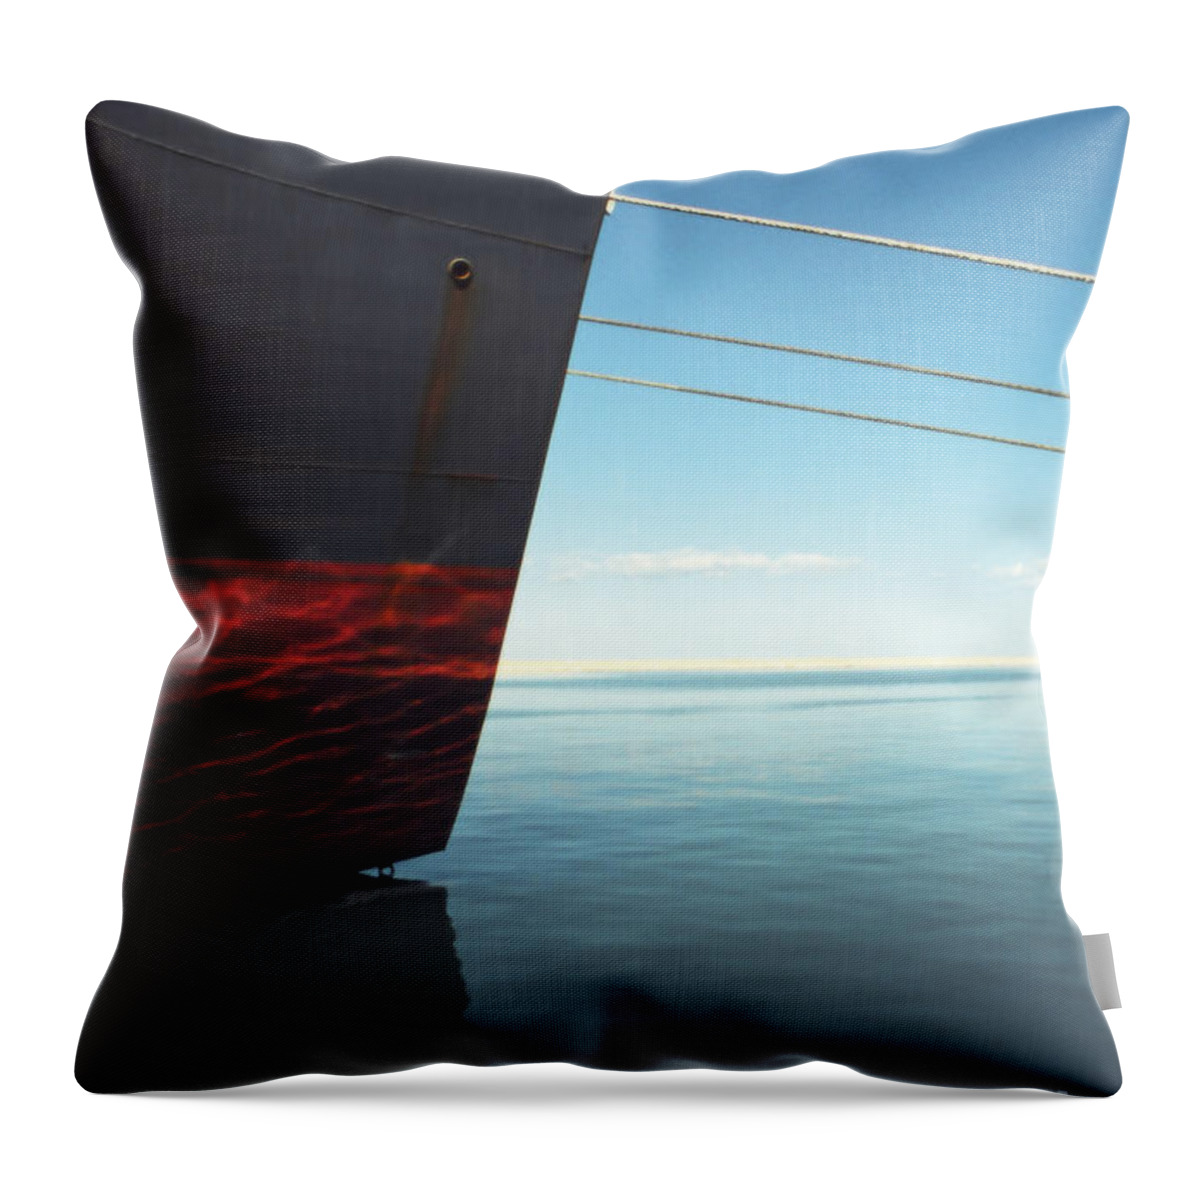 Marc Nader Photo Art Throw Pillow featuring the photograph Call Of The Distant Shores by Marc Nader